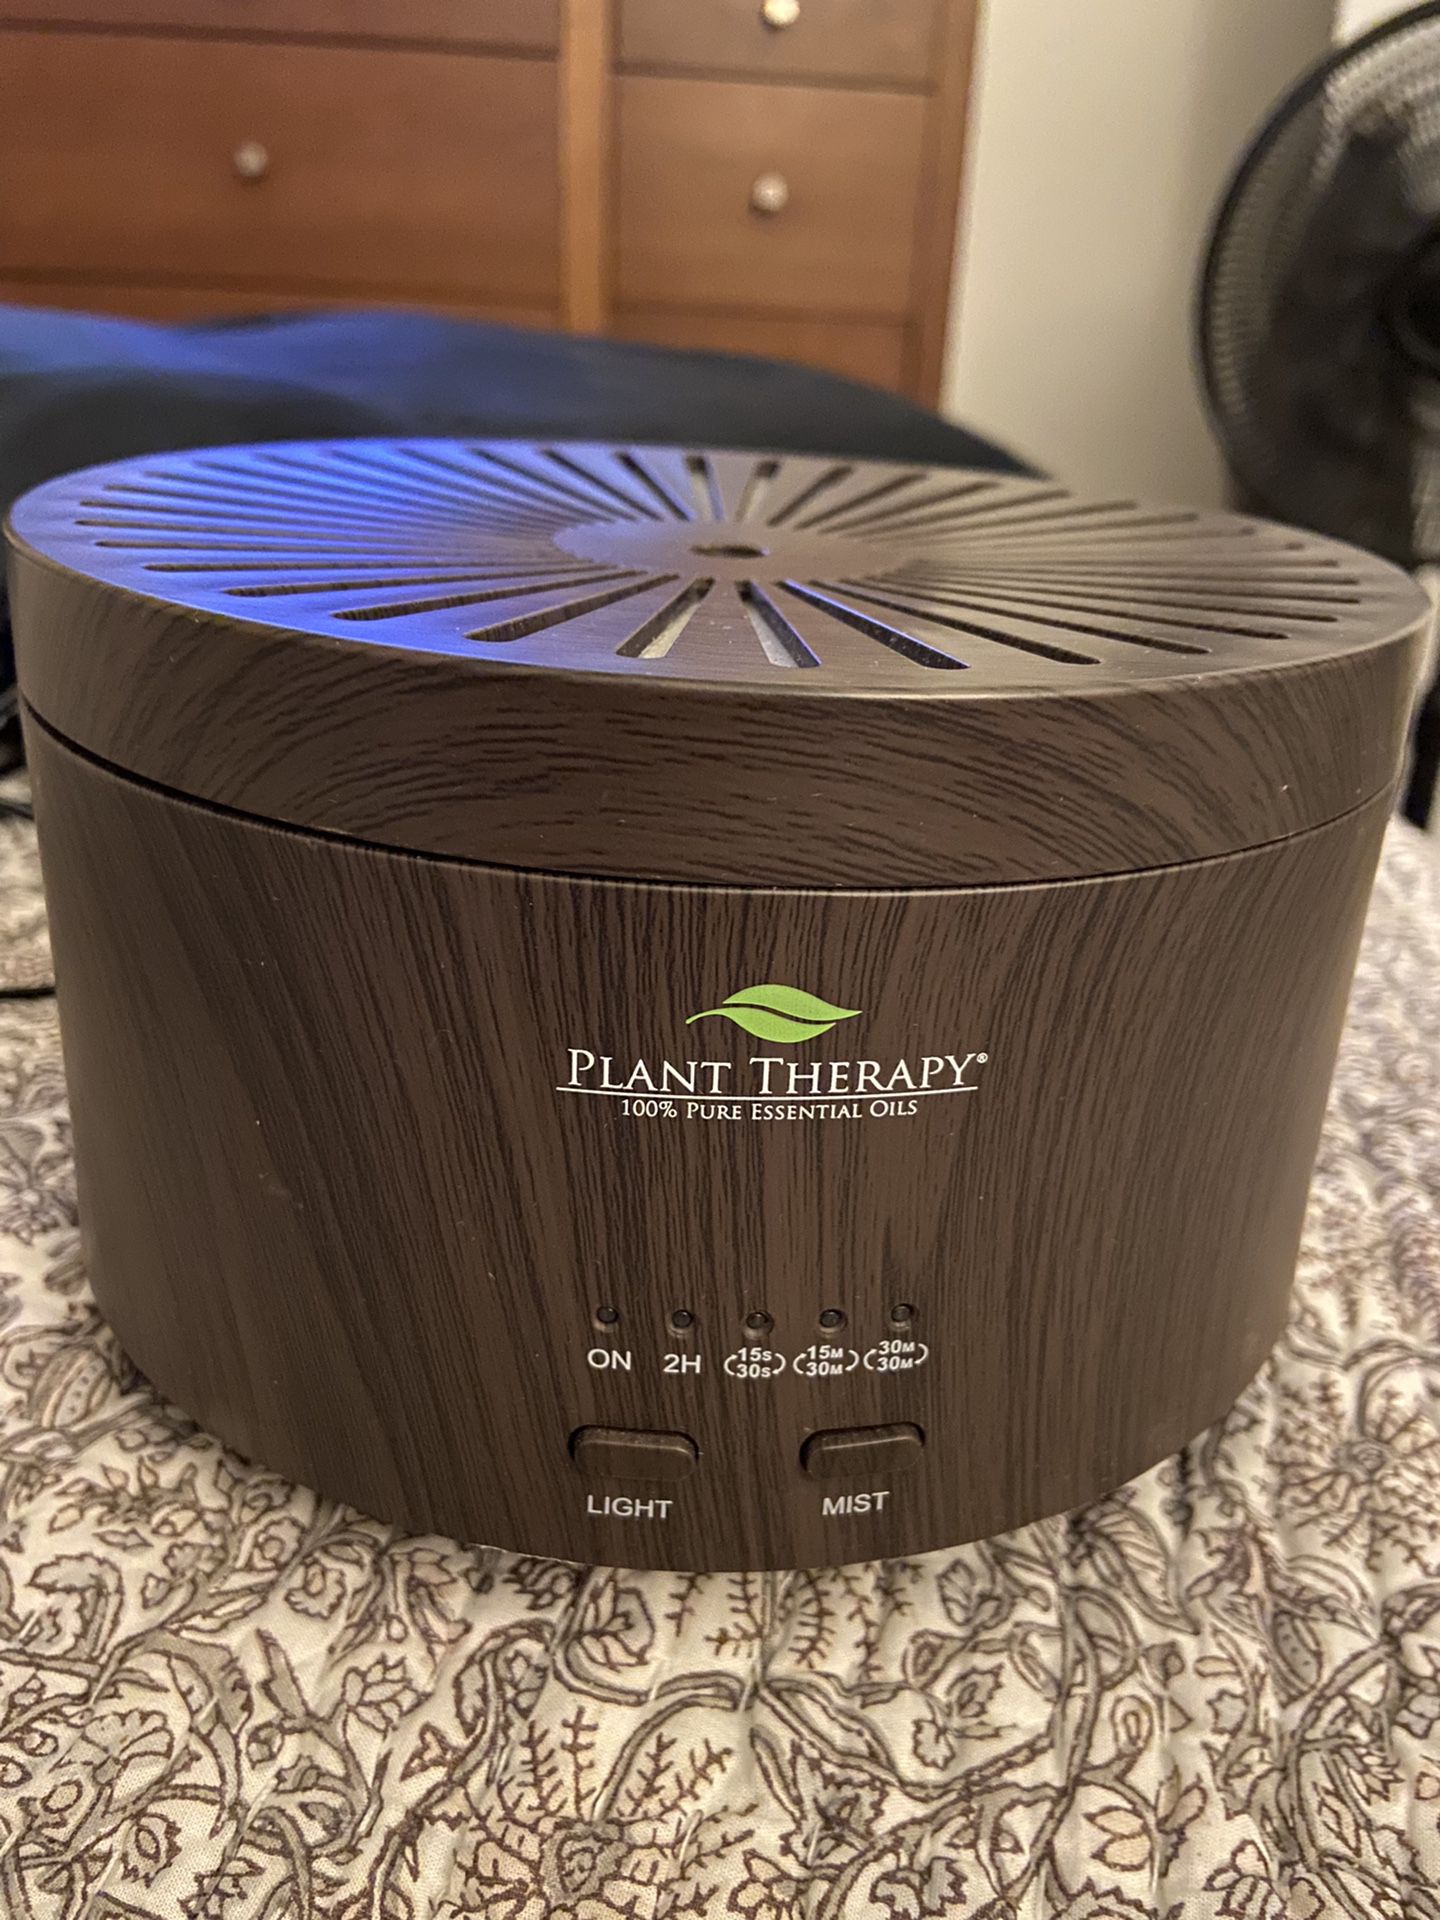 IN EXCELLENT CONDITION AND VERY ATTRACTIVE! Essential Oil Diffuser